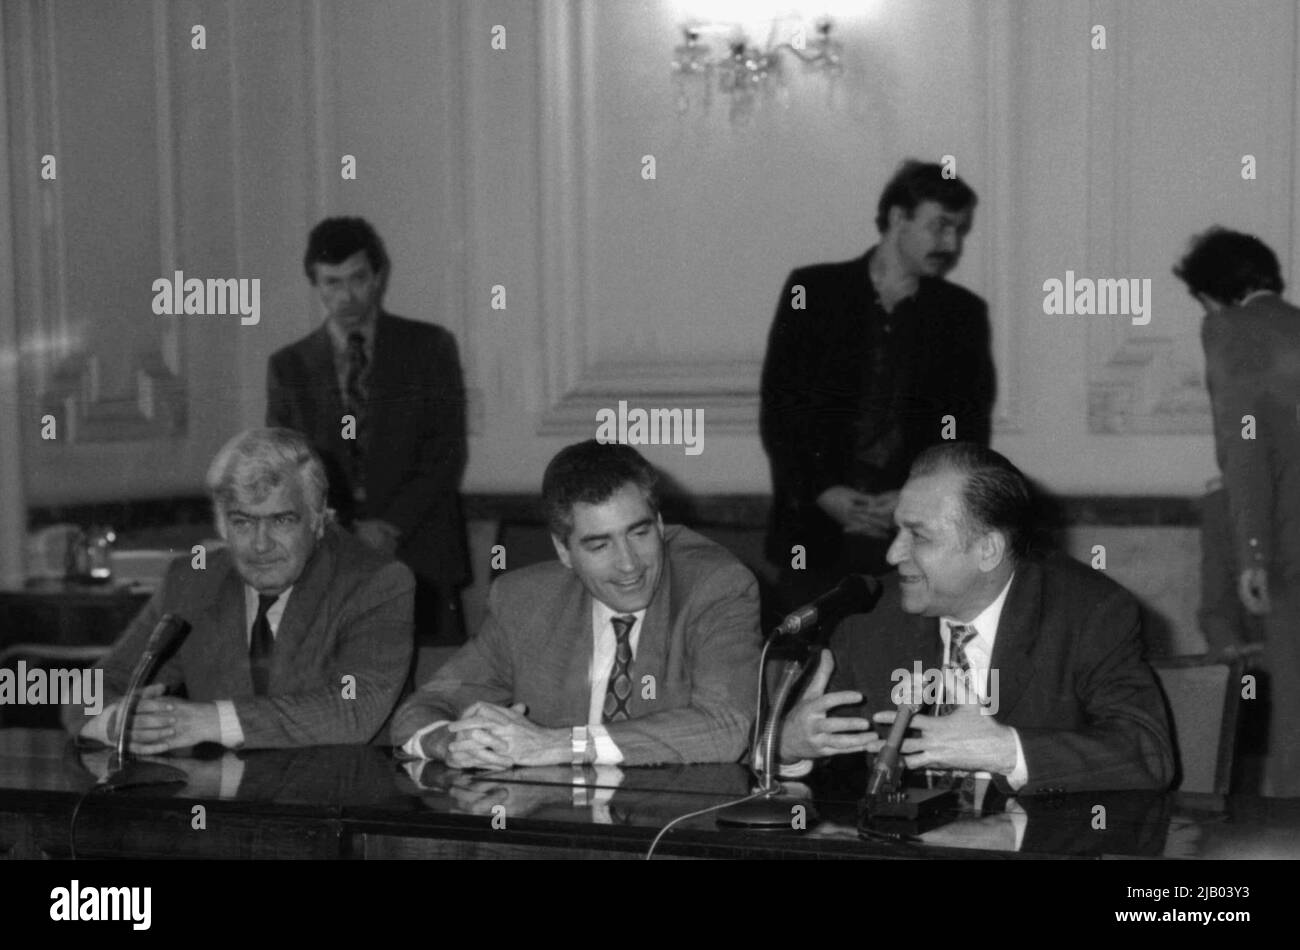 Bucharest, Romania, 1990. The President of the Romanian Football Federation, Mircea Angelescu, with politicians Petre Roman & Ion Iliescu, during a press conference following the qualification of the national football team to the 1990 FIFA World Cup. Stock Photo